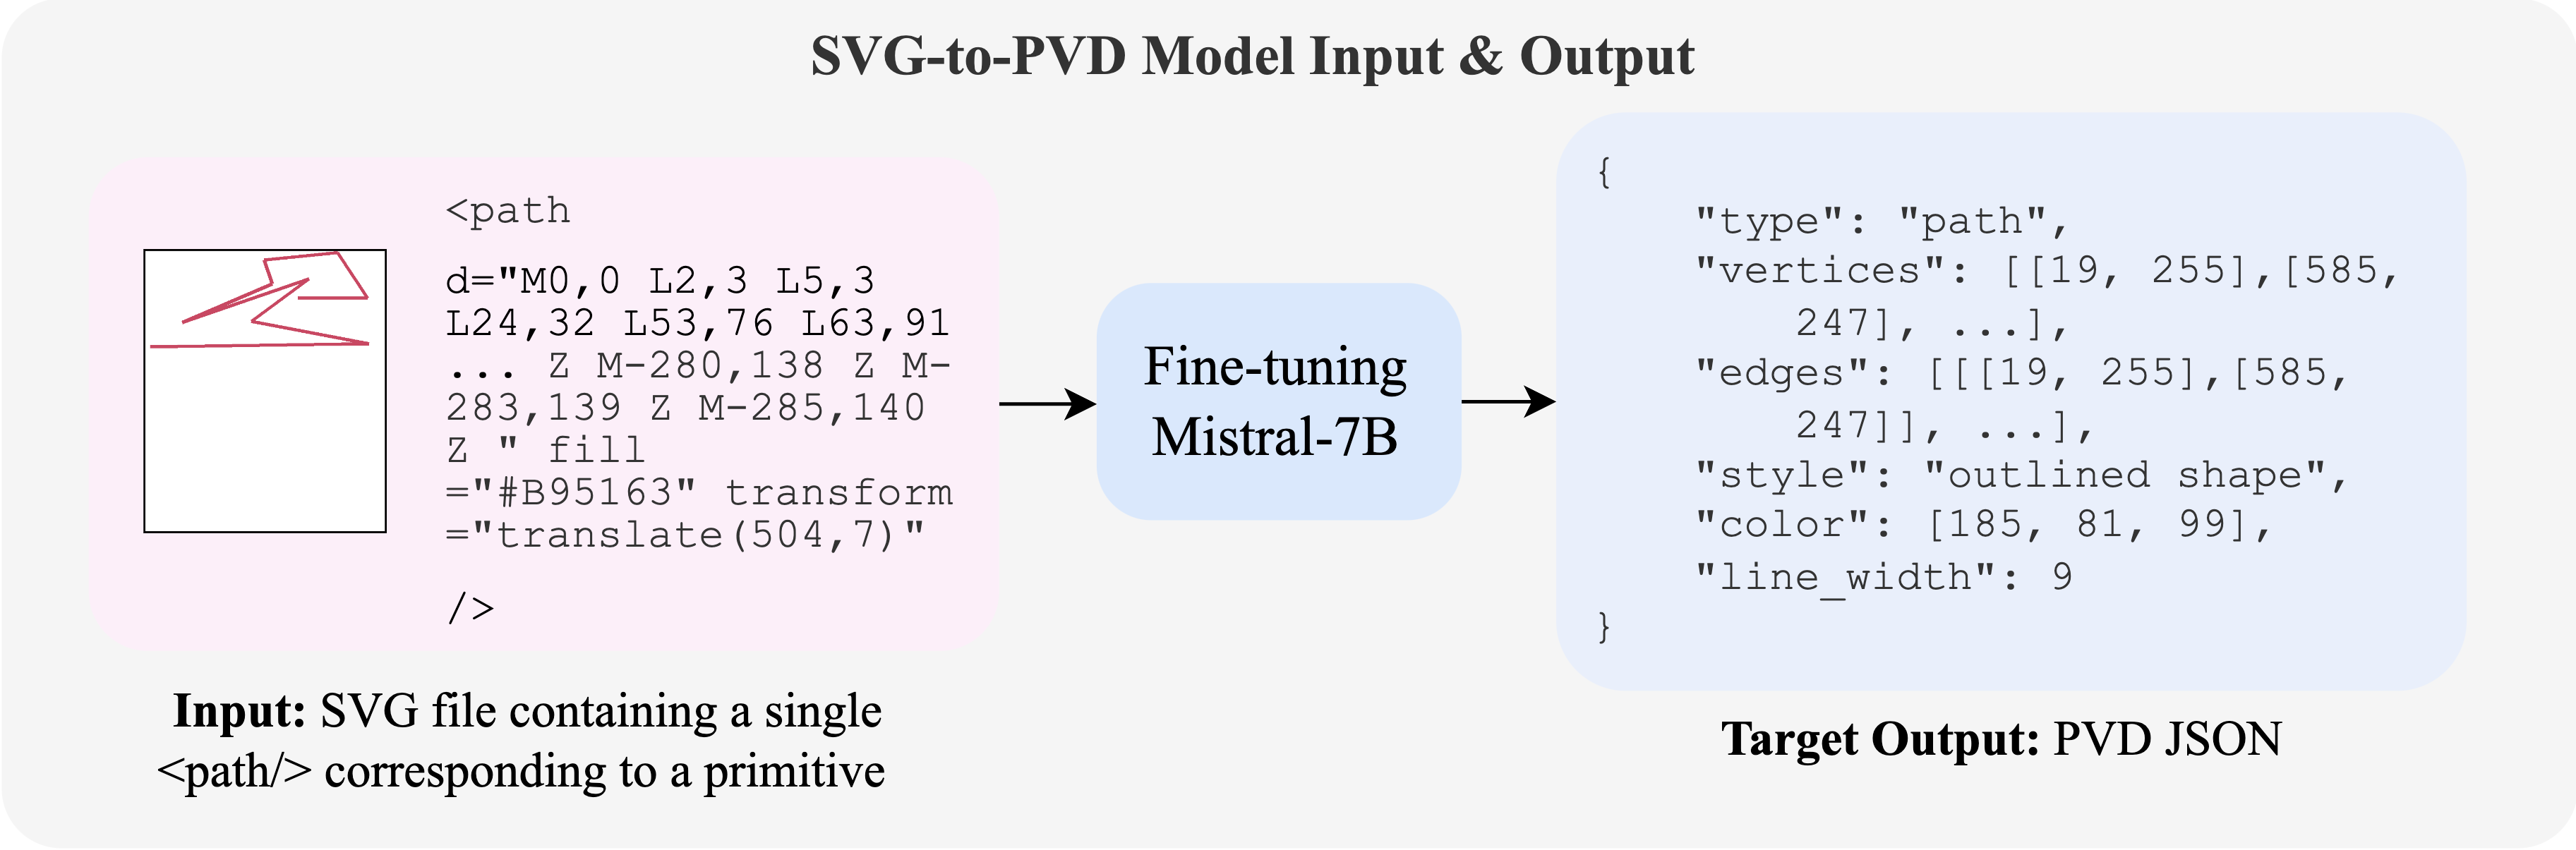 SVG-to-PVD model.